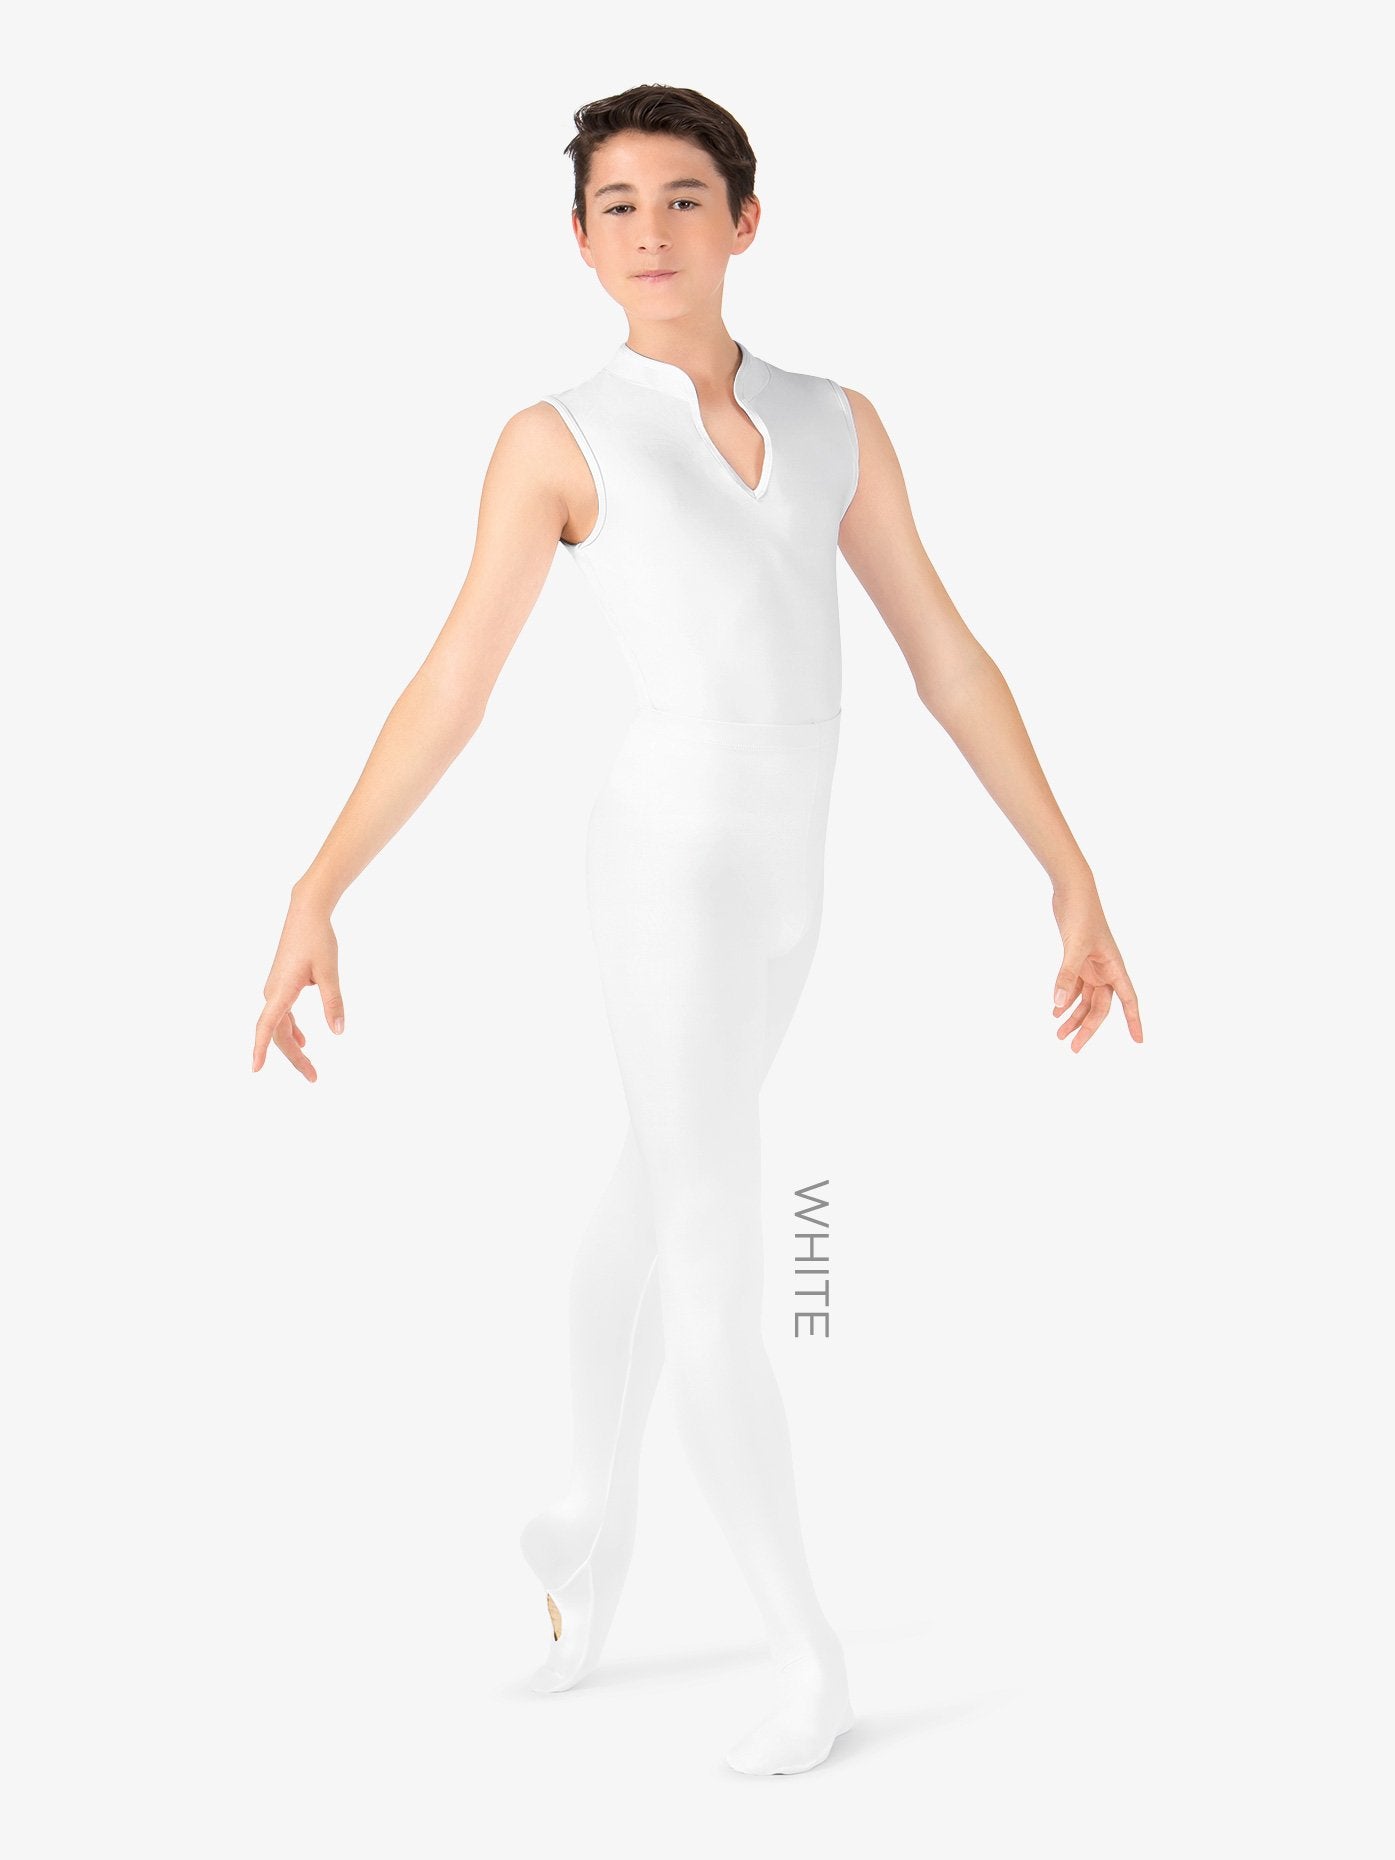 Mens 'Viggo' Convertible White Dance Tights: Versatile and comfortable tights for male dancers